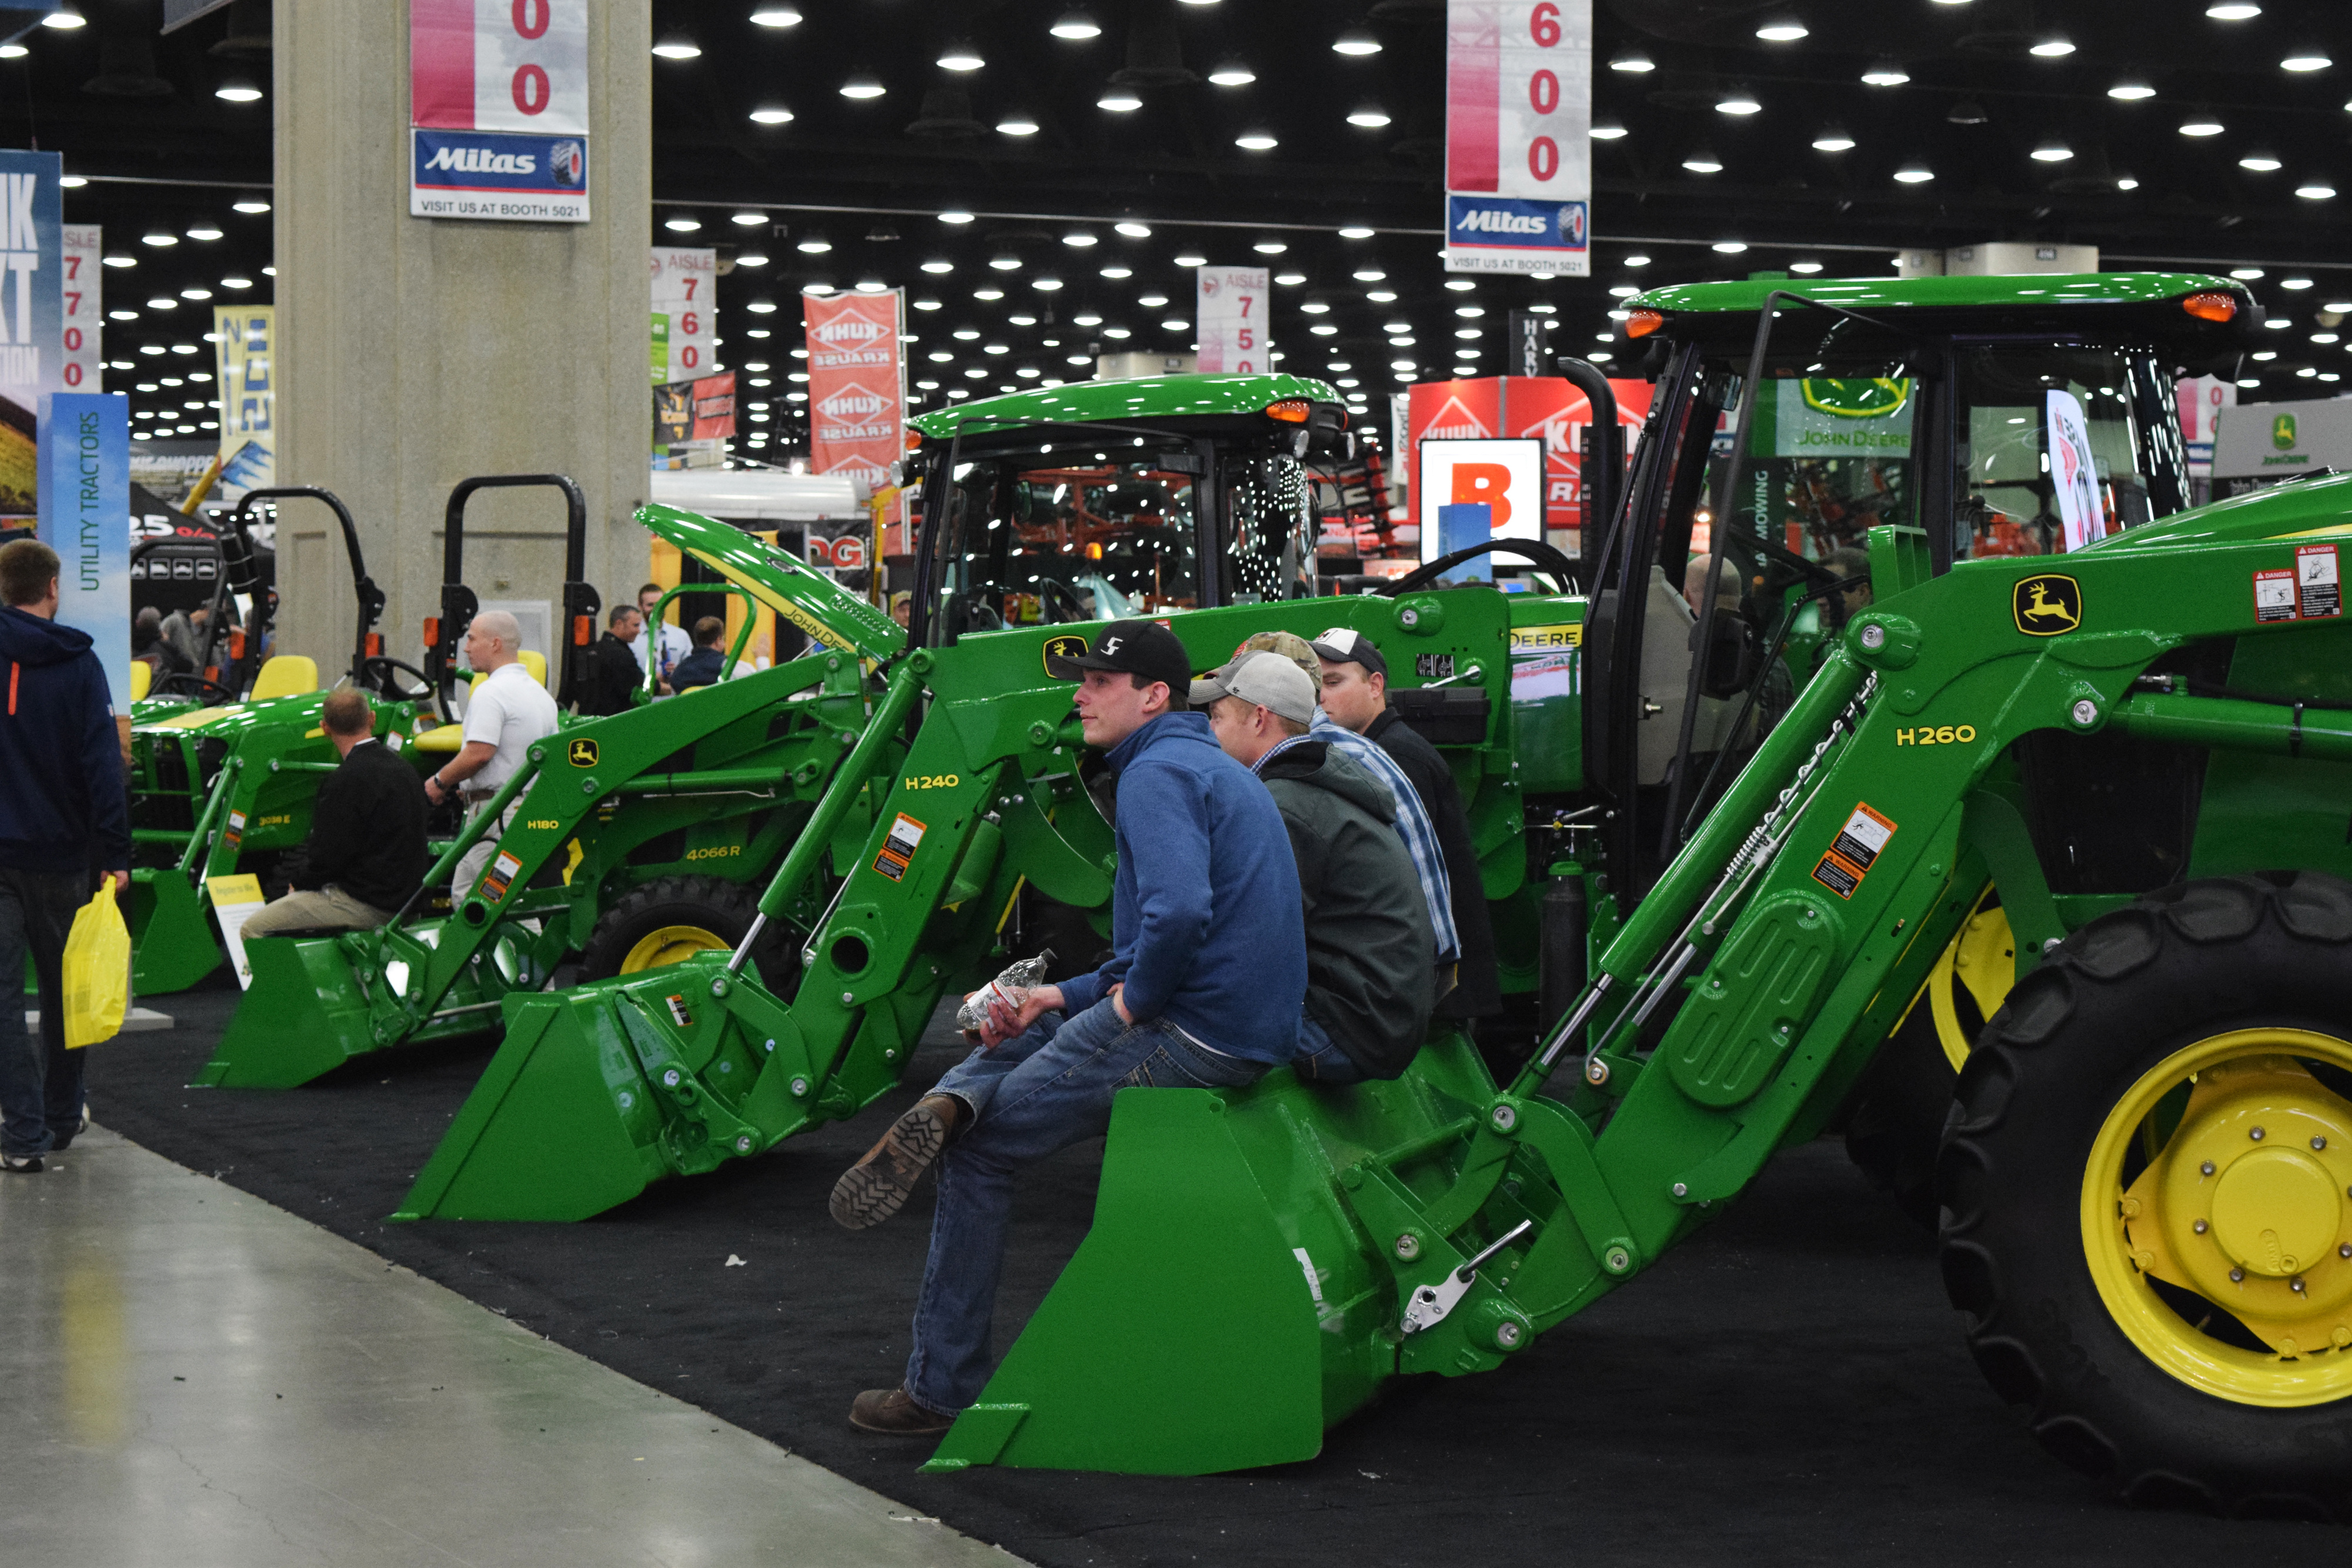 People look at Deere equipment as they attend National Farm Machinery show in Louisville